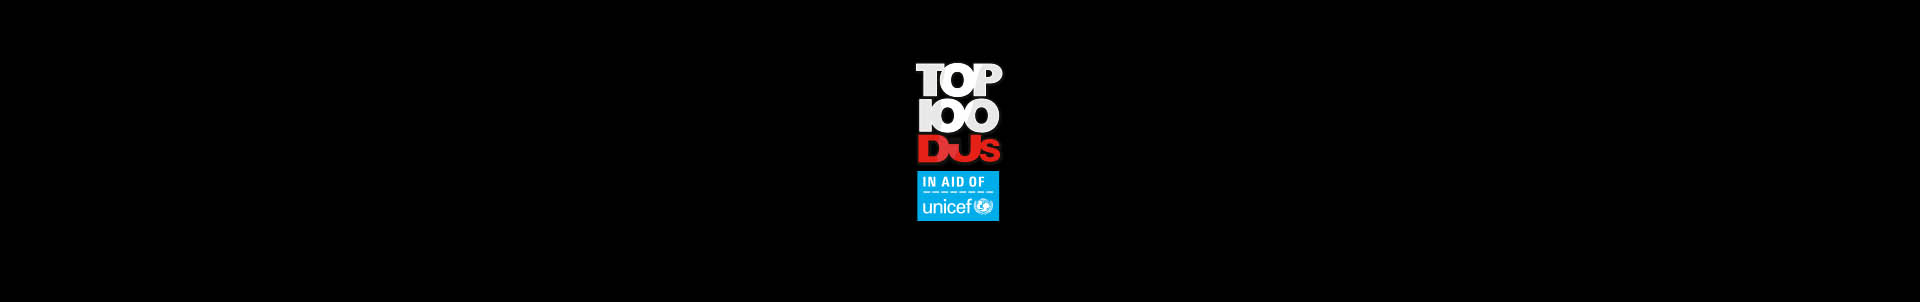 Watch the newest DJ Top 100 support video's